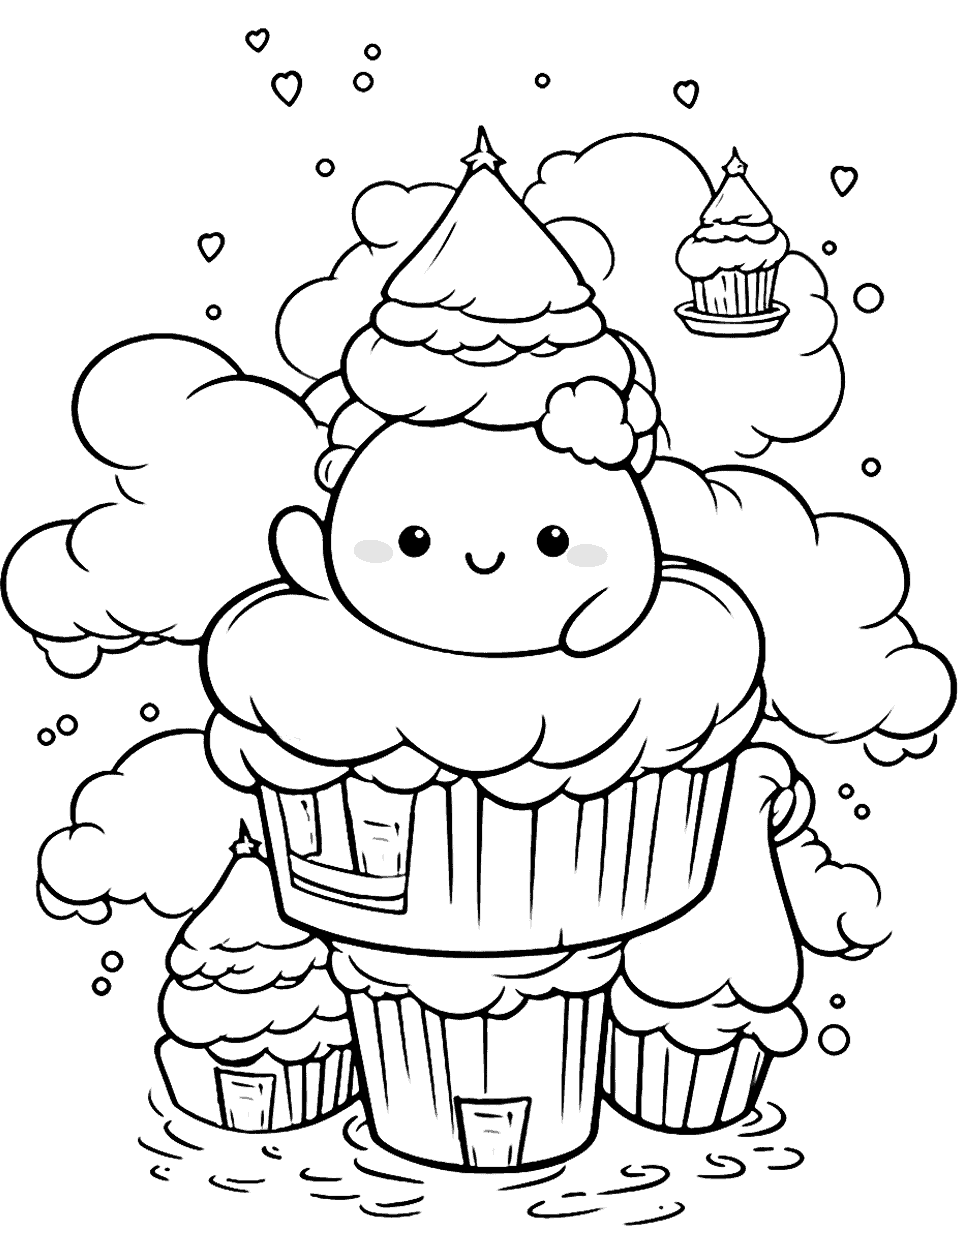 Adorable Dessert Island Kawaii Coloring Page - A Kawaii island made entirely of desserts, with ice cream trees and cupcake houses.